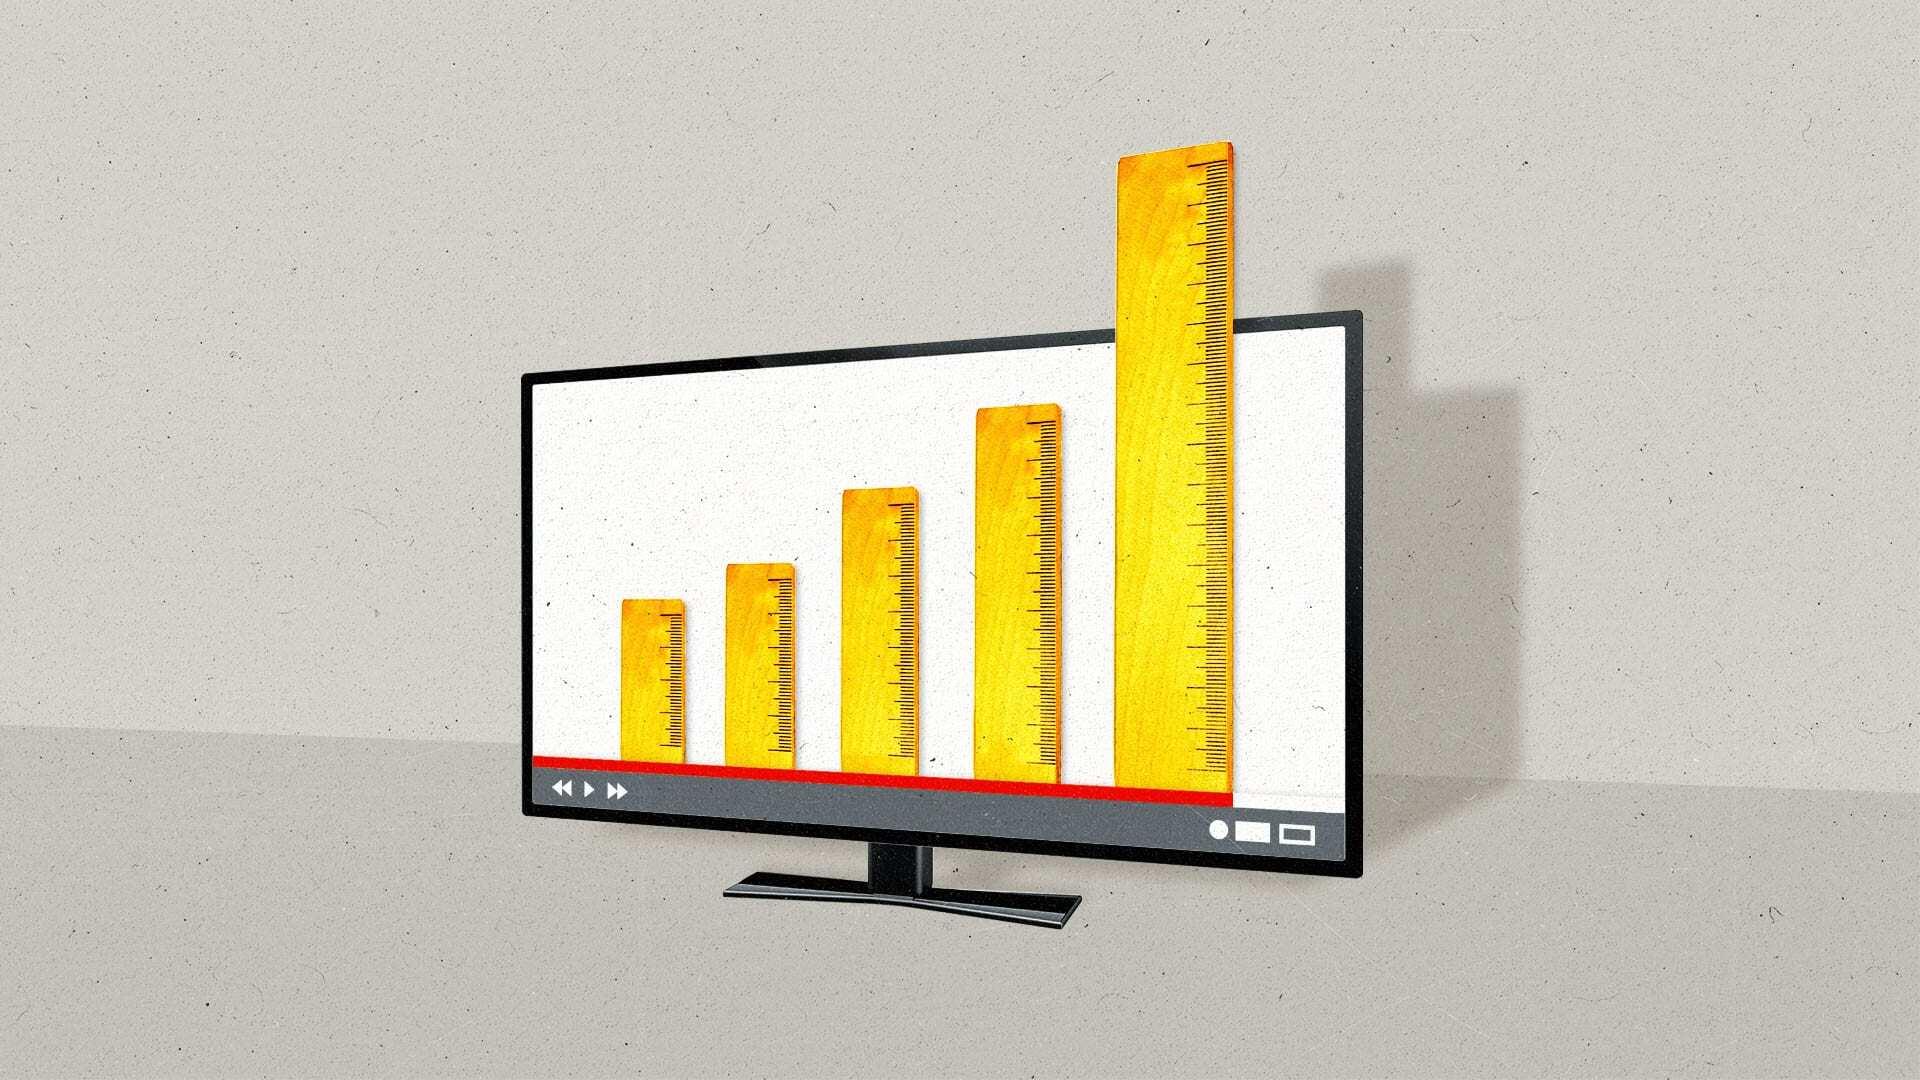 A series of 5 rulers emerge from a connected TV like a bar chart.